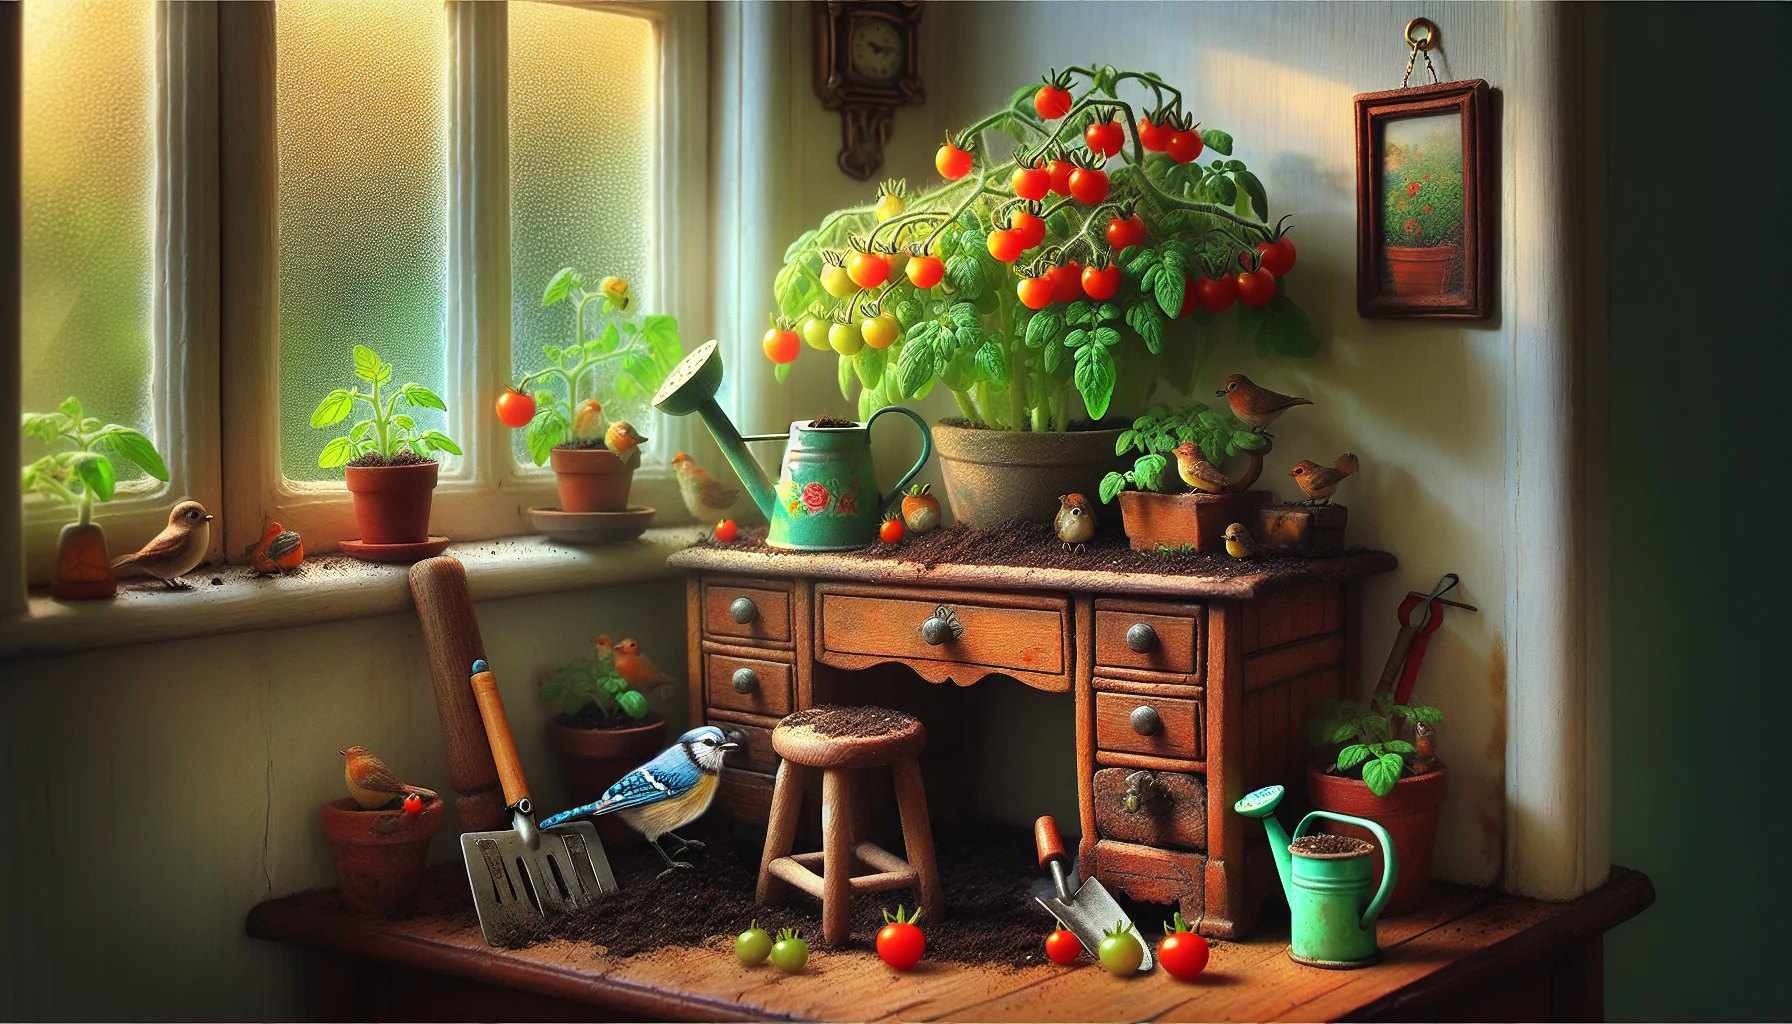 Showcase an endearingly whimsical scene set indoors. Picture a small, vibrant green cherry tomato plant blooming profusely in an unexpected place – sitting atop a playful, antique wooden desk! The desk is crowded with gardening tools - a tiny watering can, a sweetly worn pair of gardening gloves, potting soil, and a mini-rake. Sunlight streaming from a frosted window above creates a dappled light effect. Feathered friends, a blue jay and a robin, perch on the window sill, peering in curiously. Teeny-weeny, glossy red cherry tomatoes pop against the foliage, tempting observers to venture into the charming world of indoor gardening.